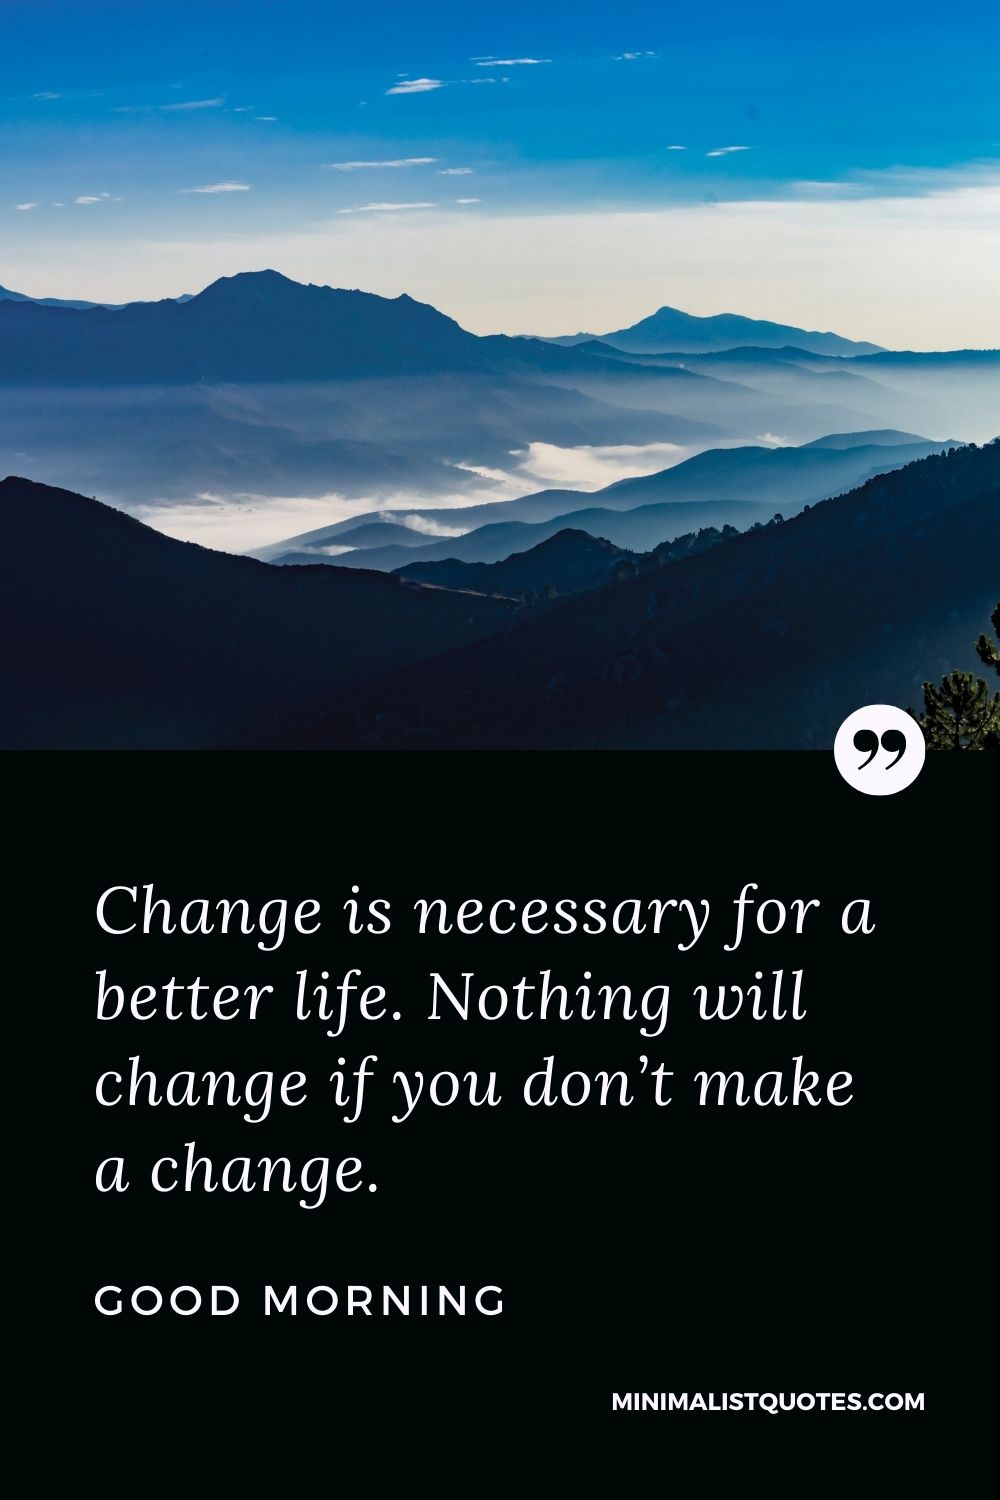 Change is necessary for a better life. Nothing will change if you don’t make a change. Good Morning!